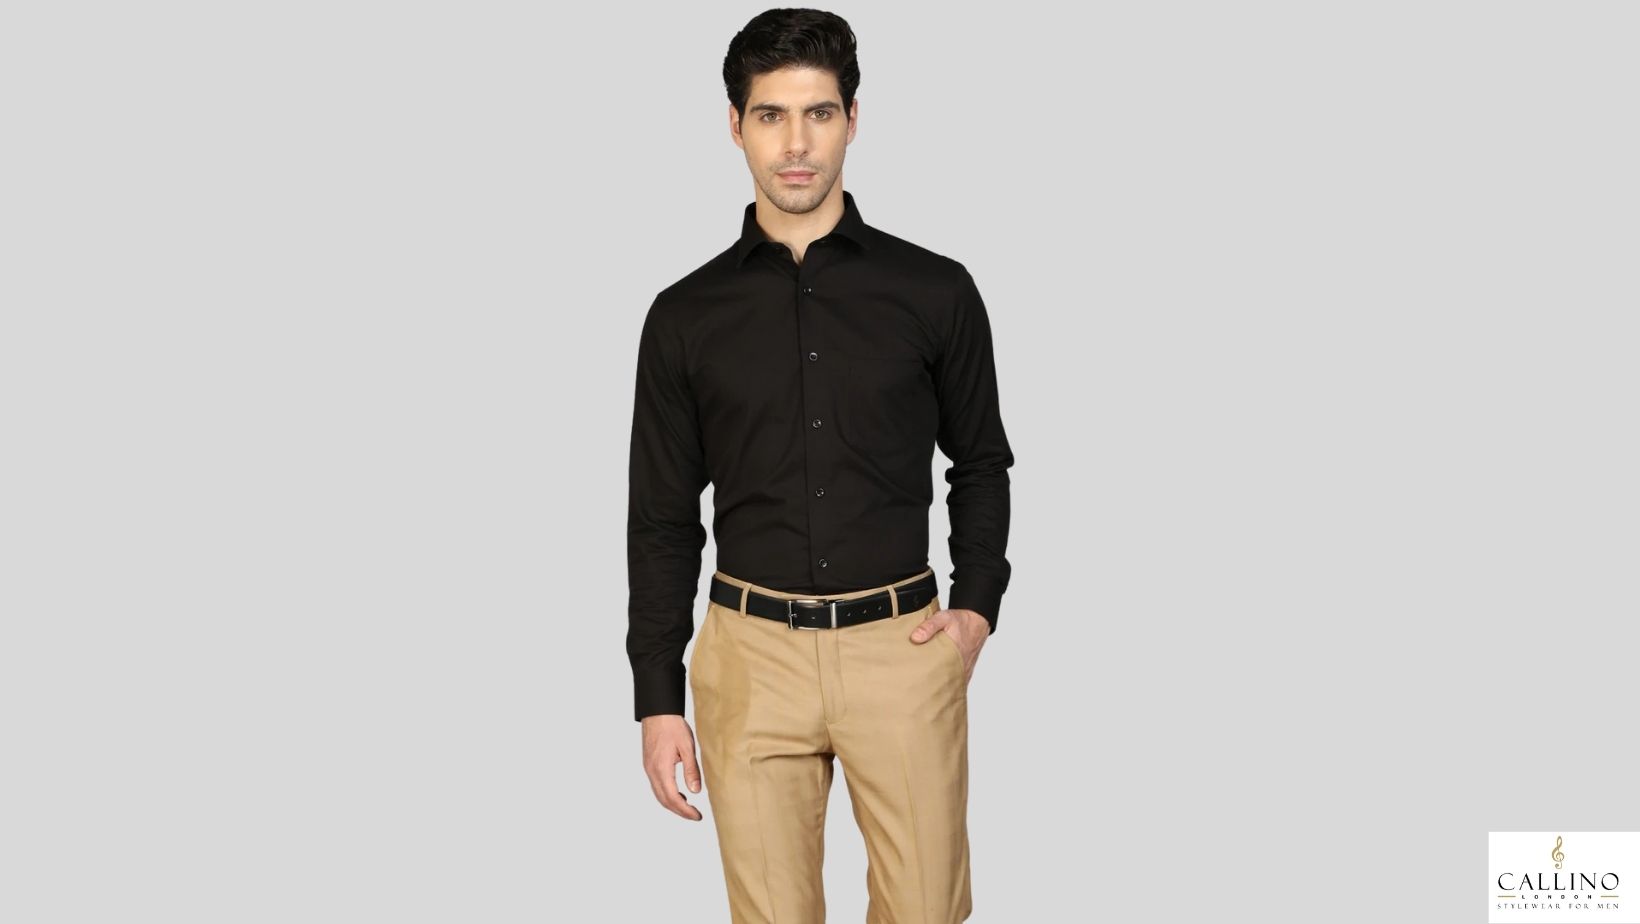 Louis Philippe Trousers - Buy Louis Philippe Trousers @Upto 50% Off Online  at Best Prices In India | Flipkart.com